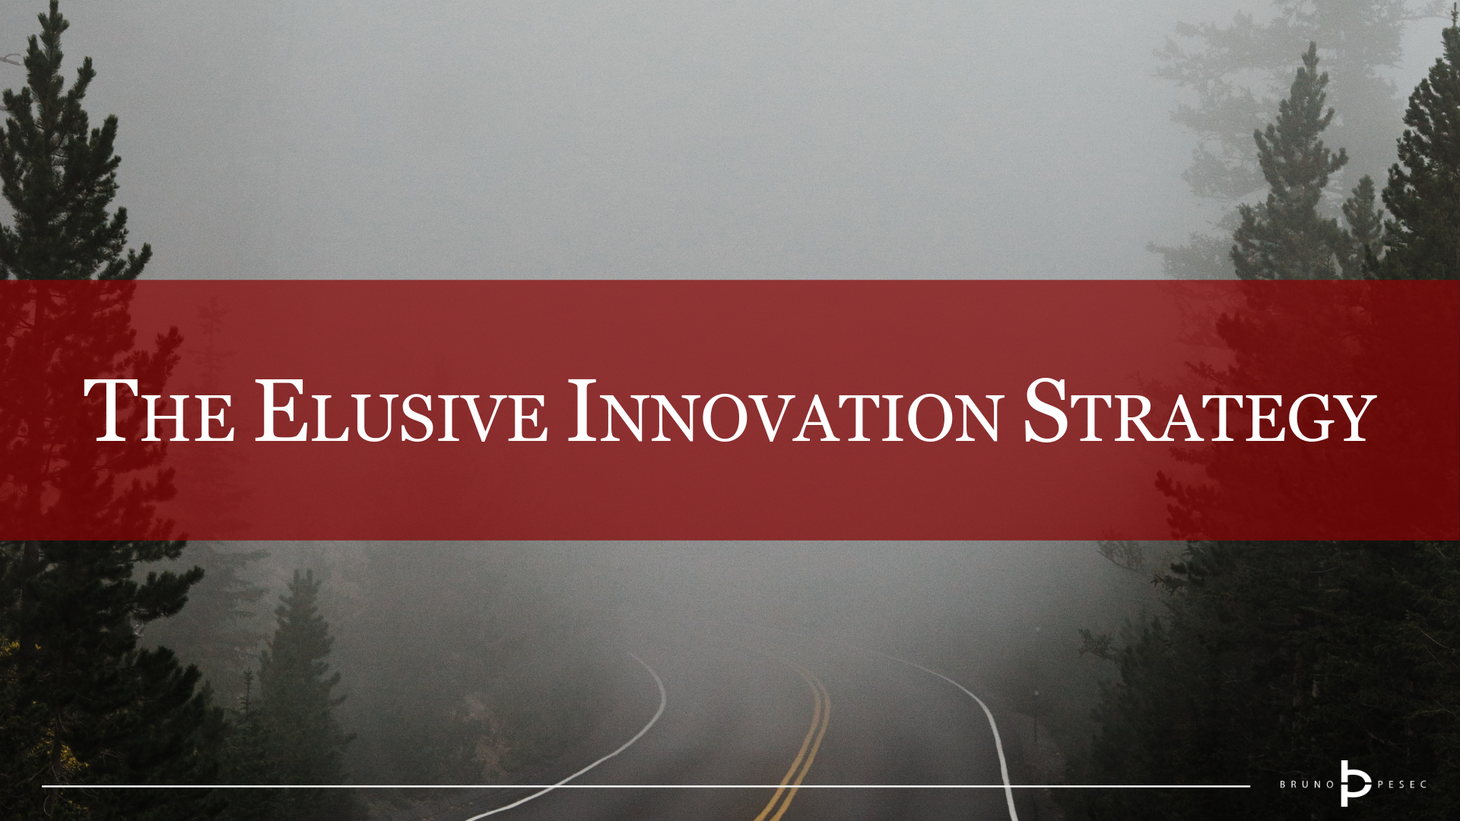 The elusive innovation strategy